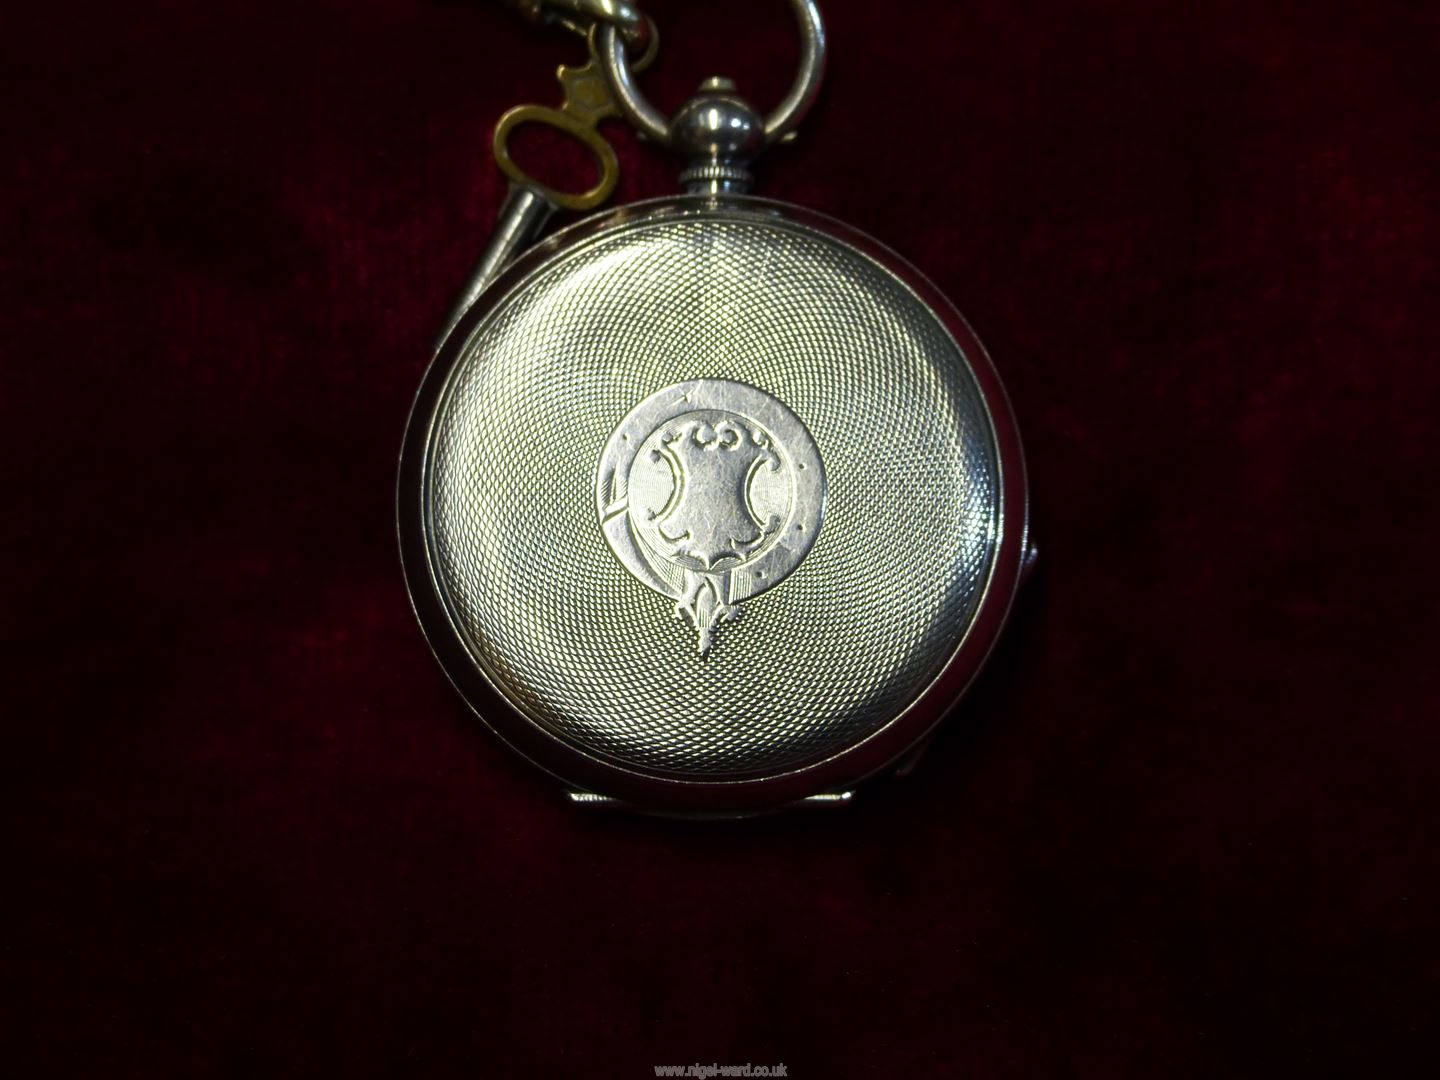 A Swiss made 925 silver cased Imperial Lever Pocket Watch by John Purser & Sons 'Watchmakers to the - Image 3 of 3